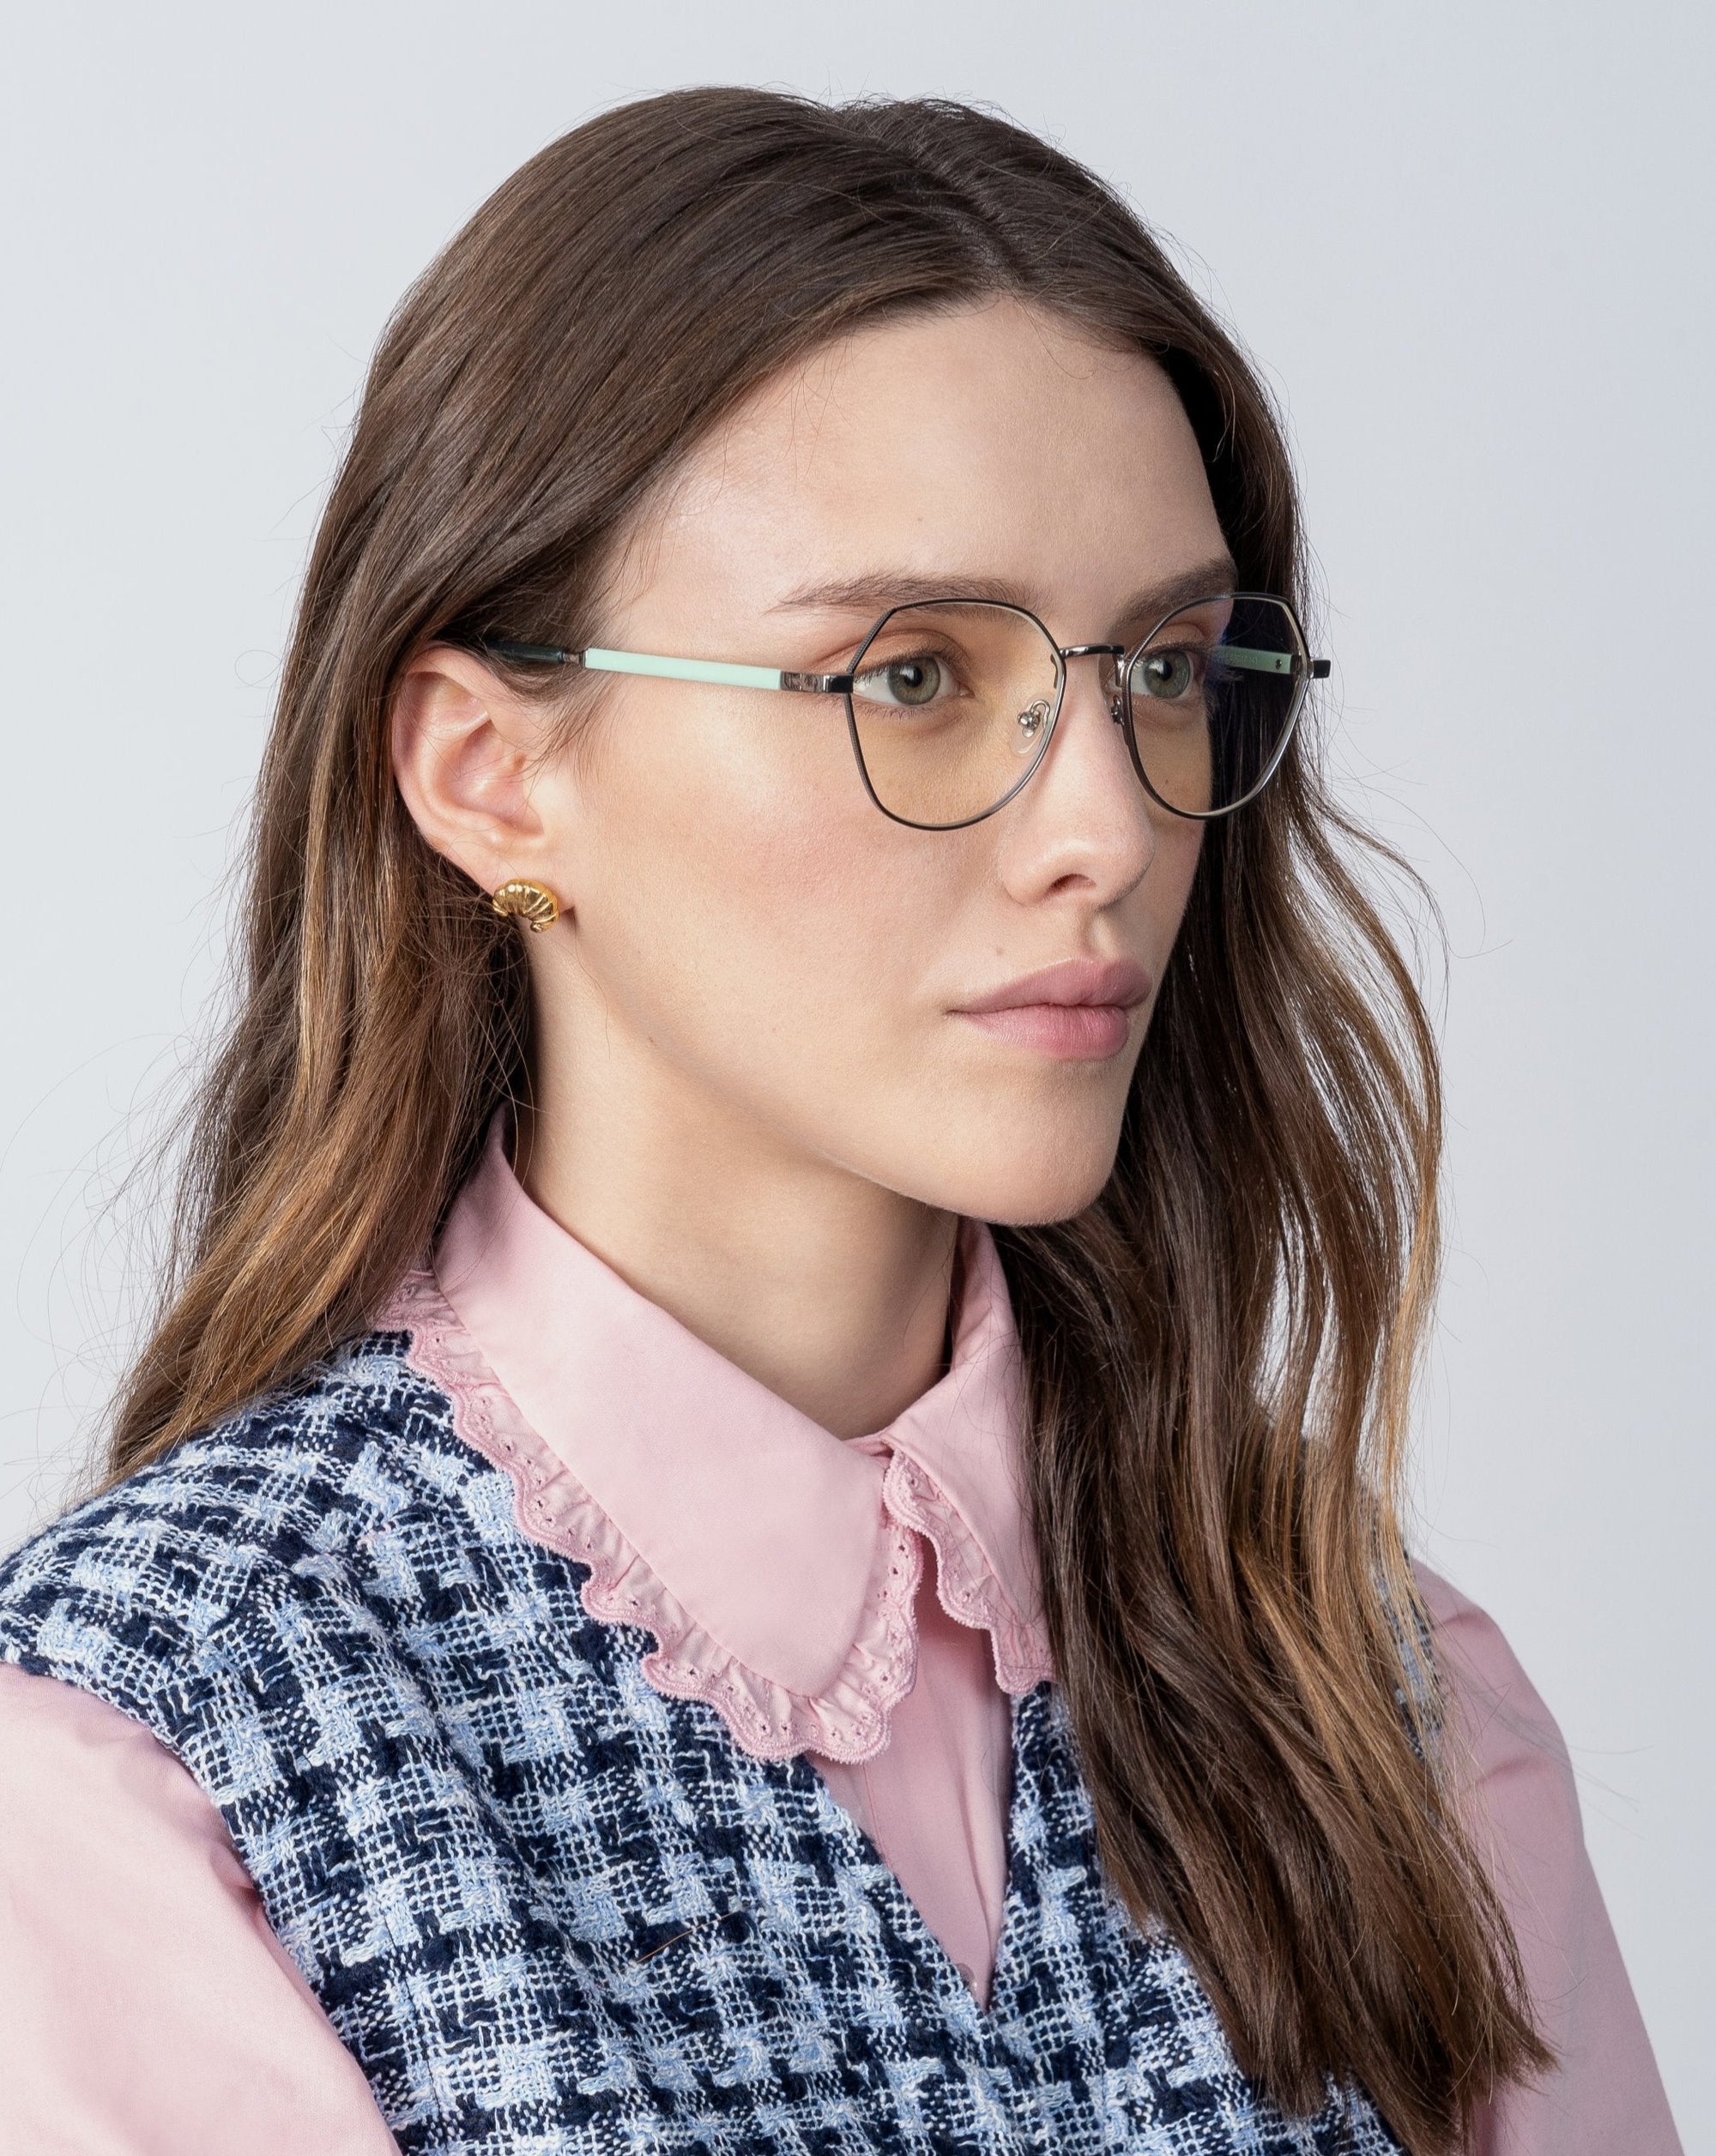 A young woman with long, wavy brown hair is wearing round, prescription Orchard lenses and metal-framed glasses by For Art's Sake®. She is dressed in a pink collared shirt with a lace trim and a blue patterned vest. She faces slightly to the left against a plain light background.